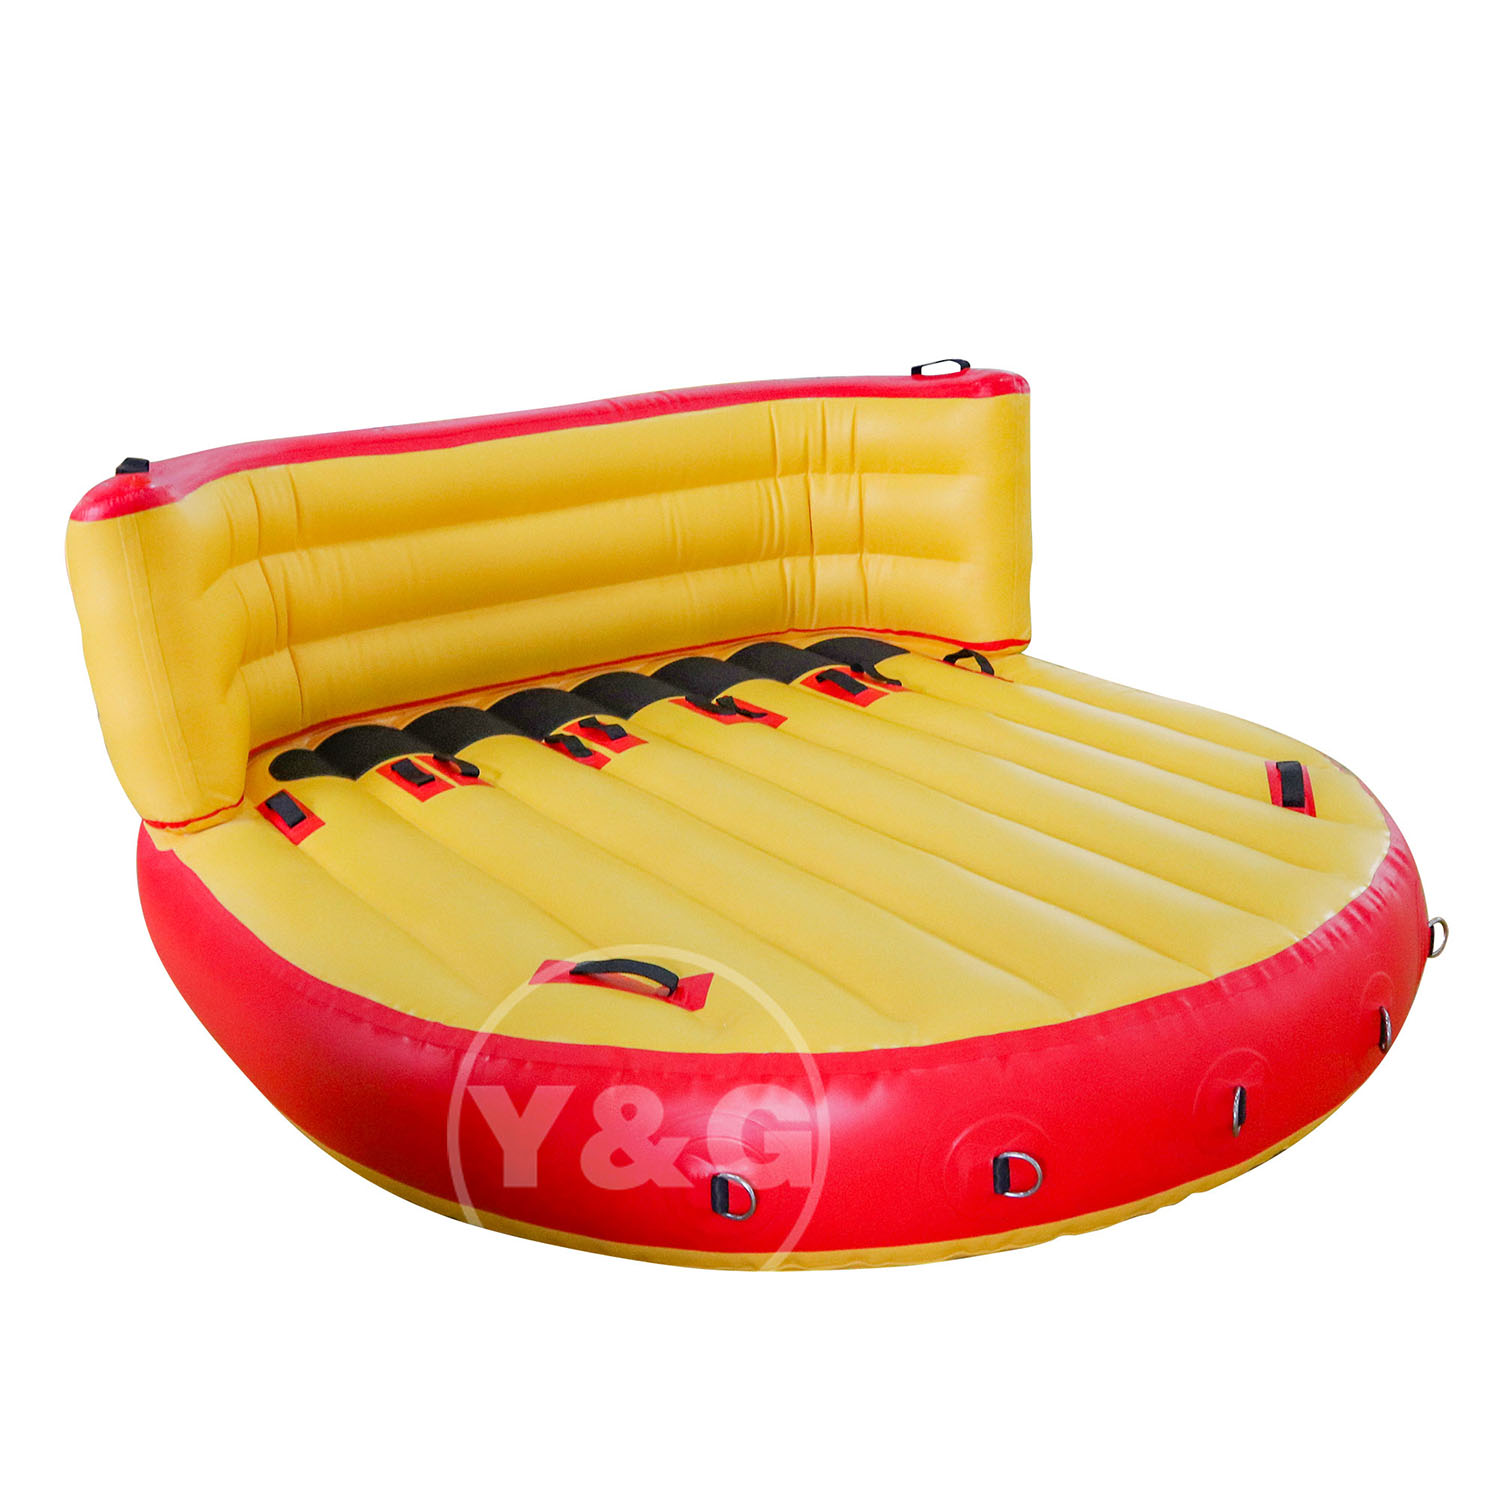 Commercial Inflatable Tugboat13